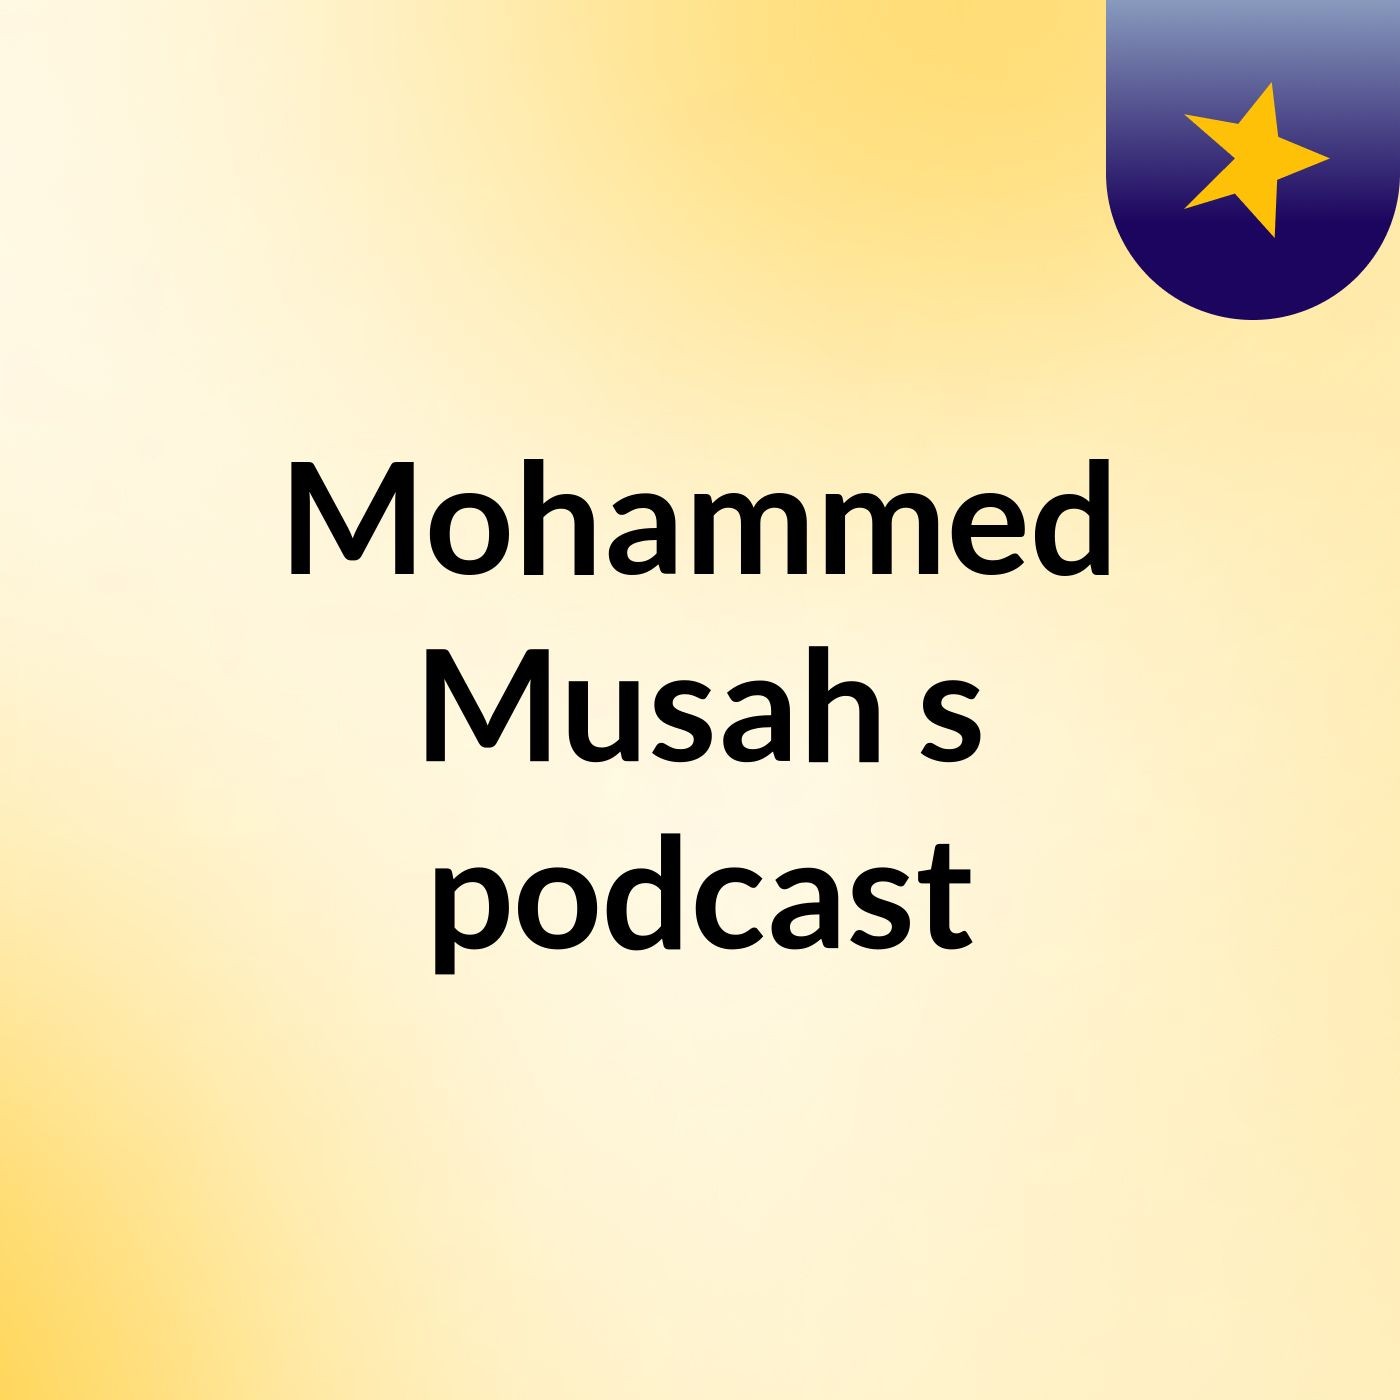 Mohammed Musah's podcast